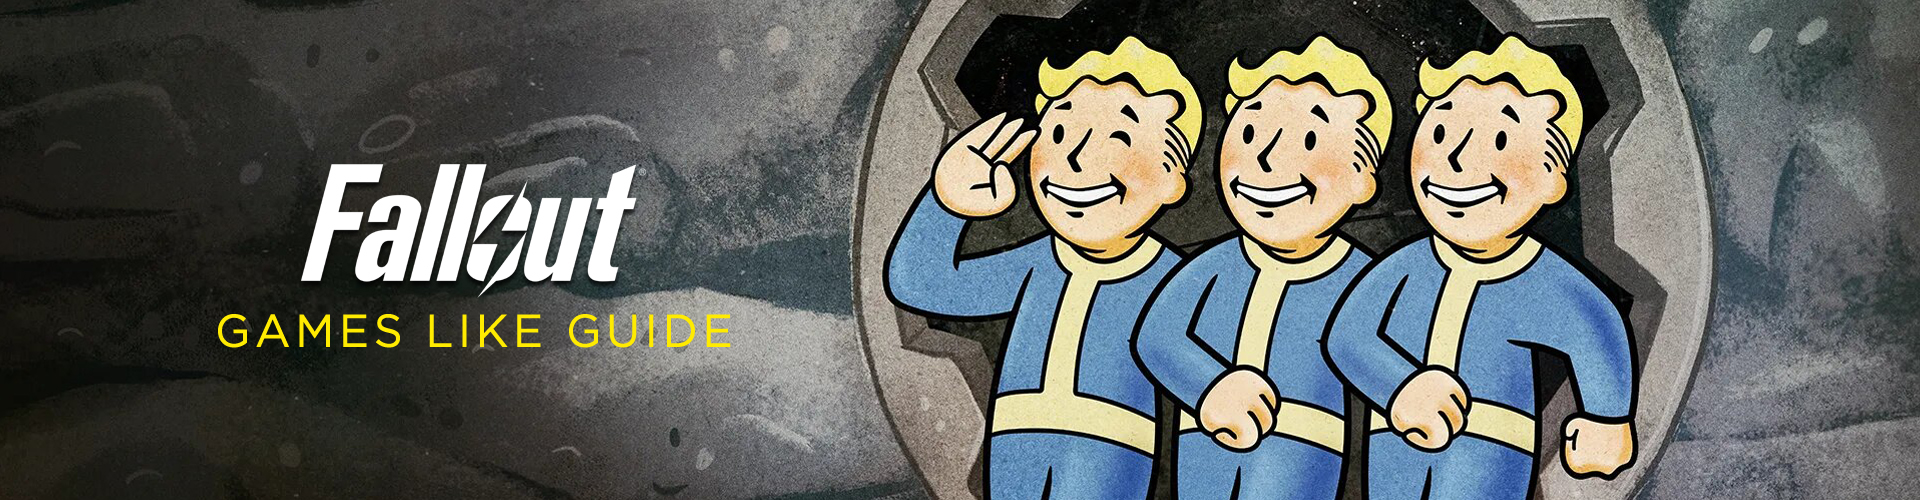 Fallout Games Like Guide